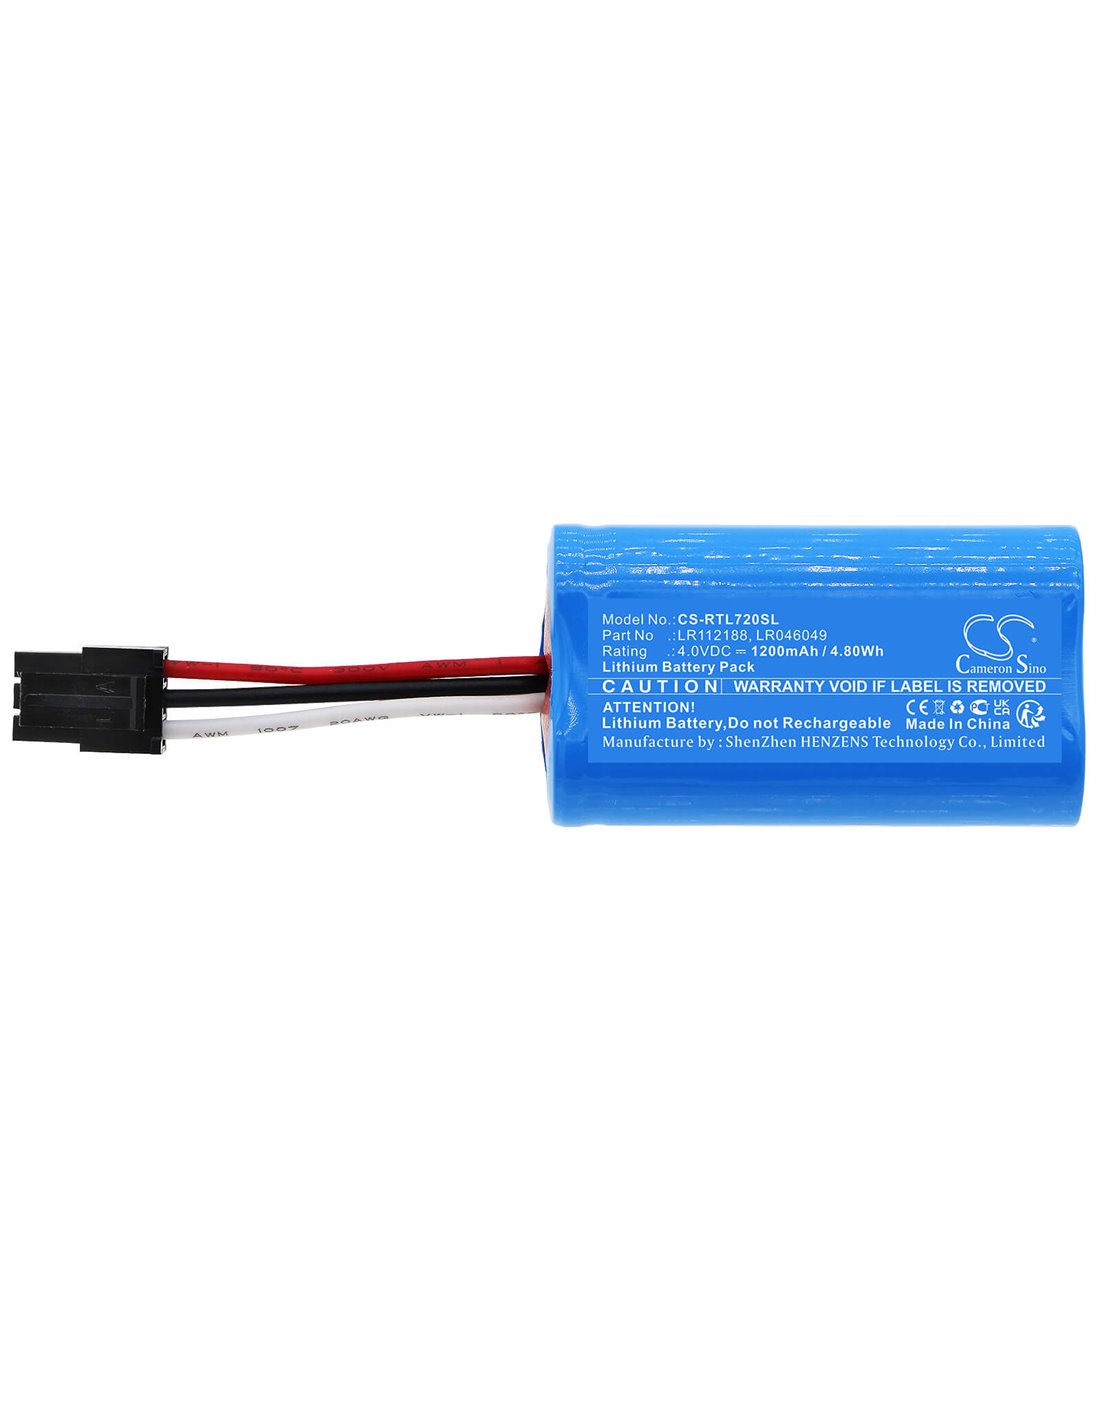 4.0V, Lithium, 1200mAh, Battery fits Range Rover, Discovery 2017, Evoque 2014, 4.80Wh